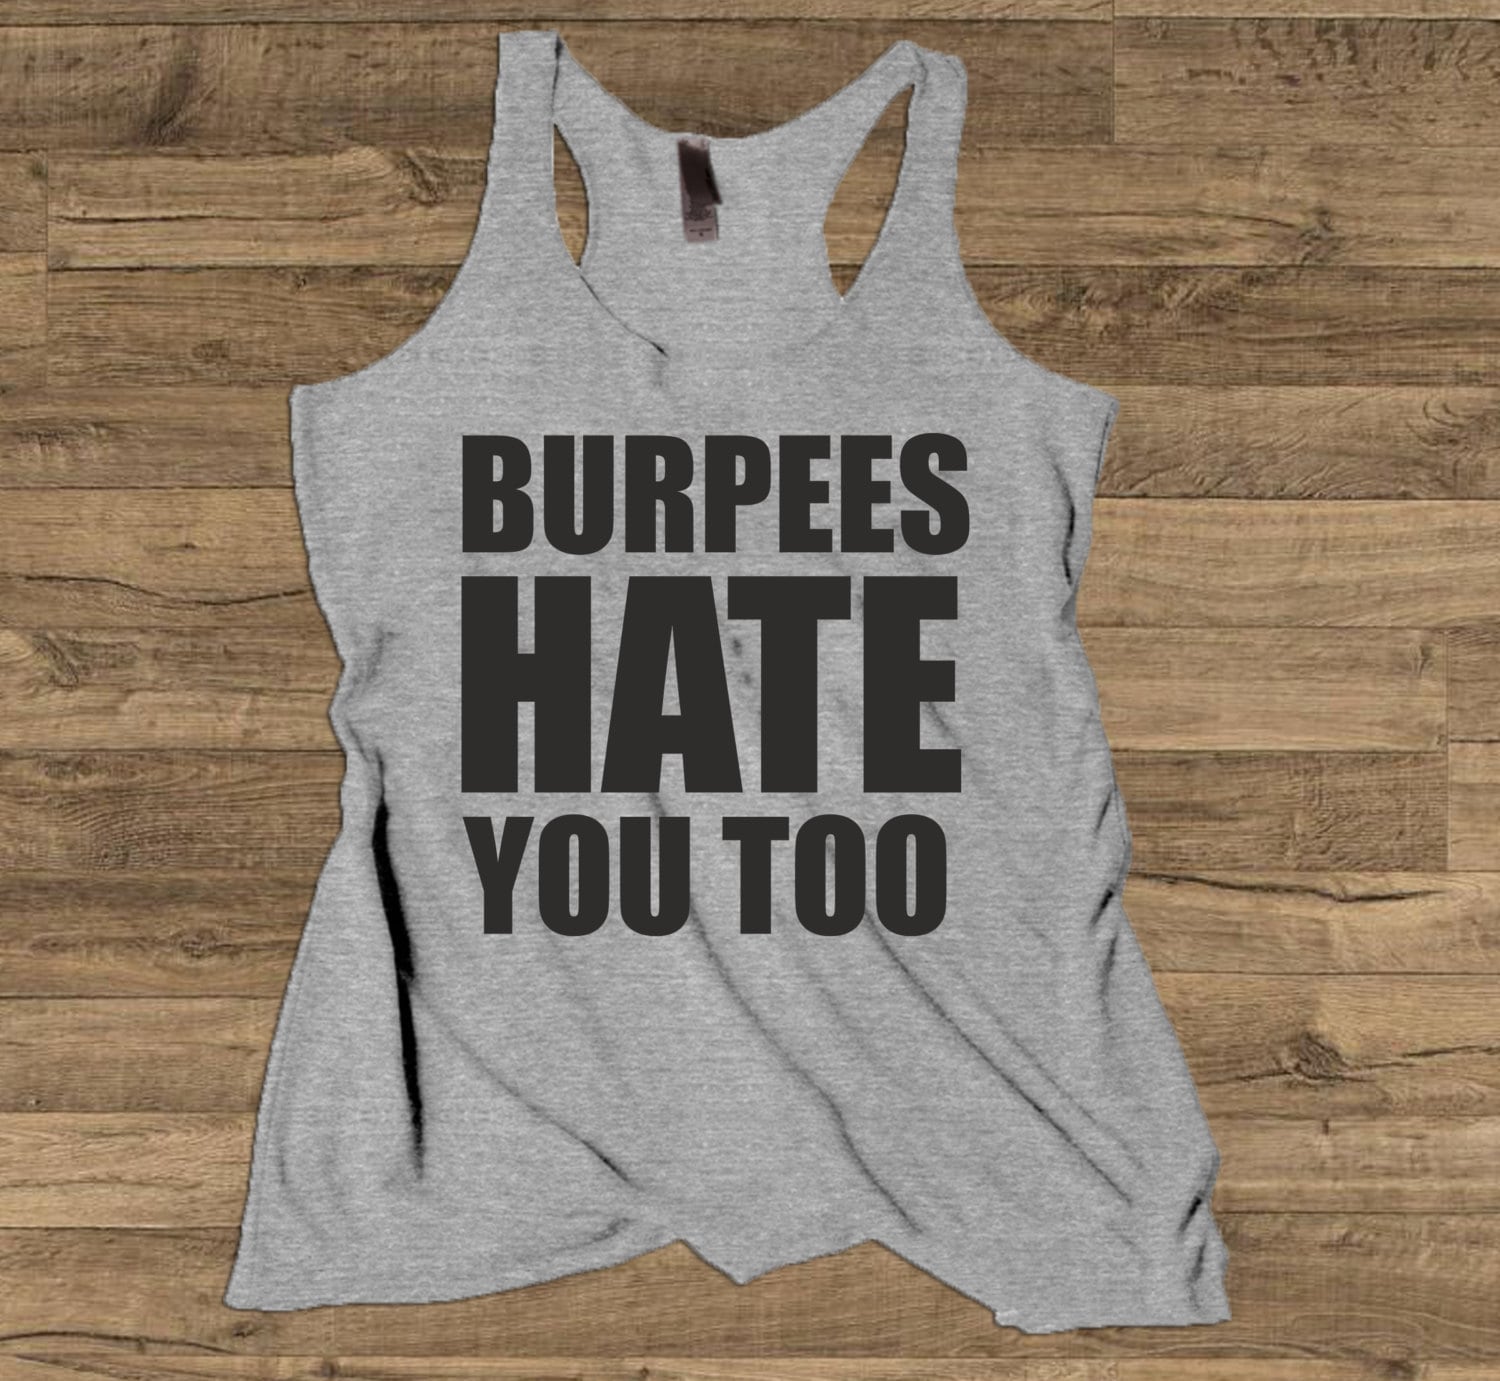 Burpees Hate You Too Gym Tank Top Working Tshirts by Girlswhotrain